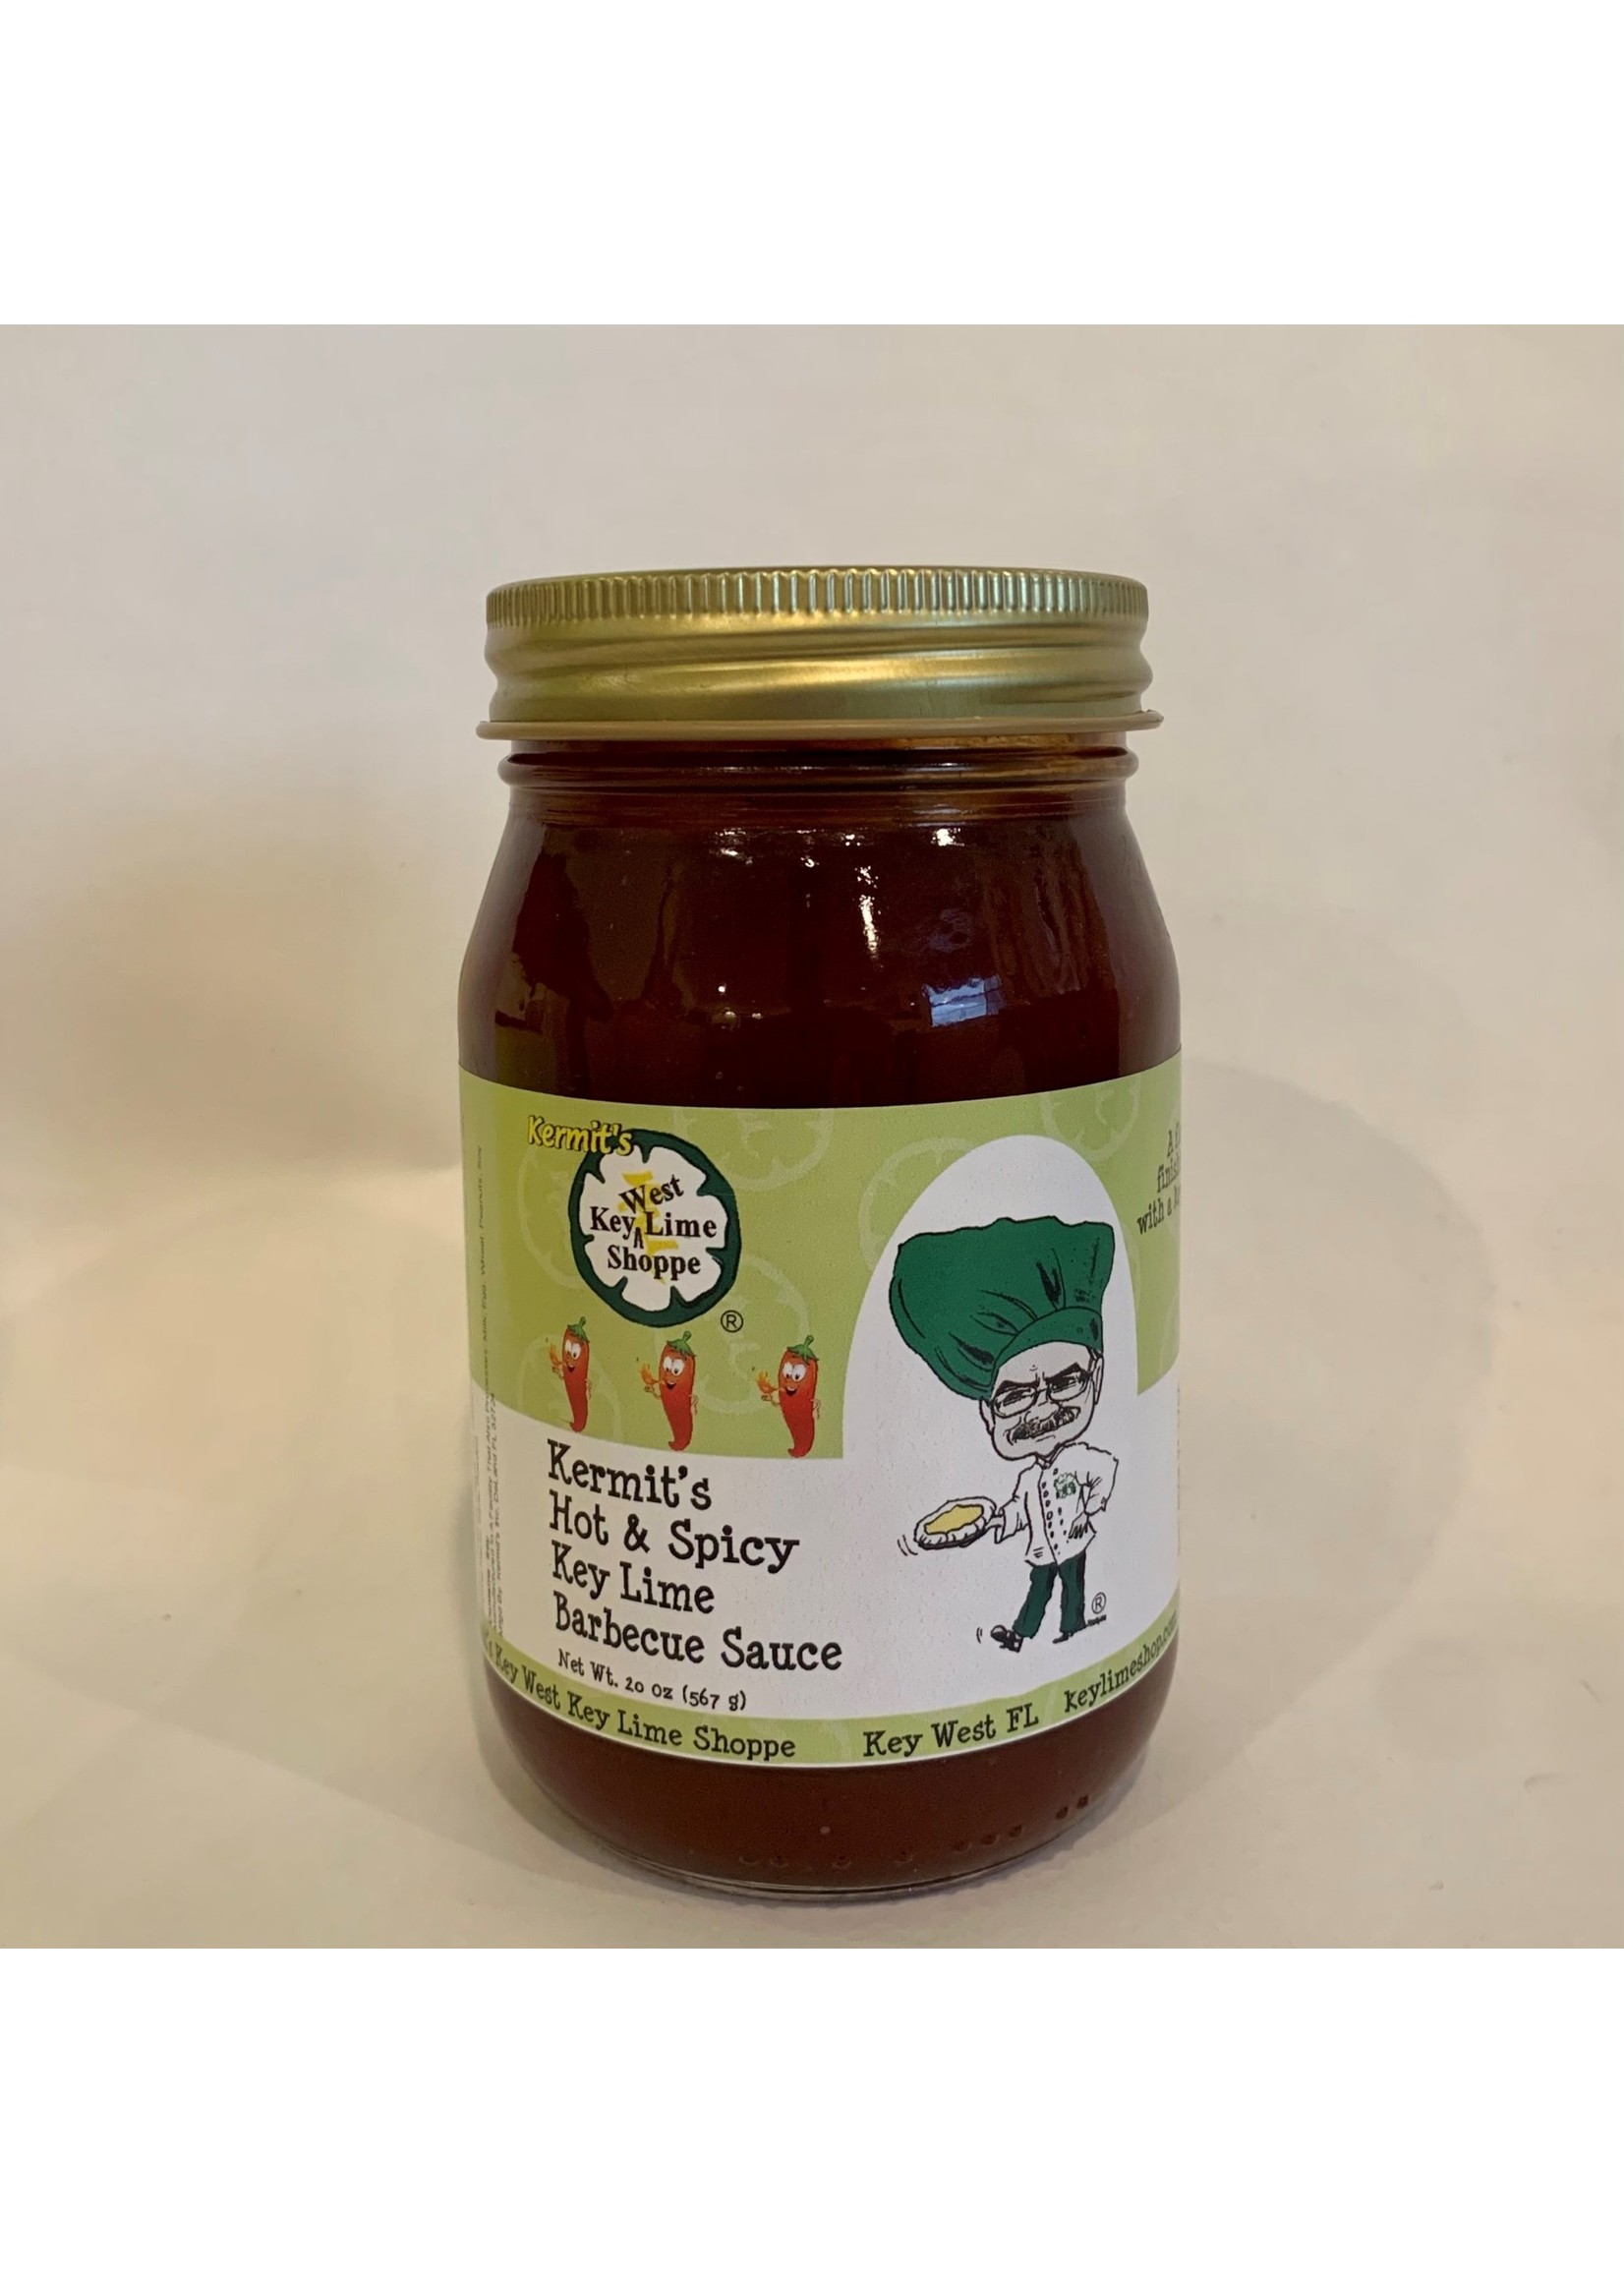 Kermit's Hot & Spicy Key Lime  Barbecue Sauce 20 oz.